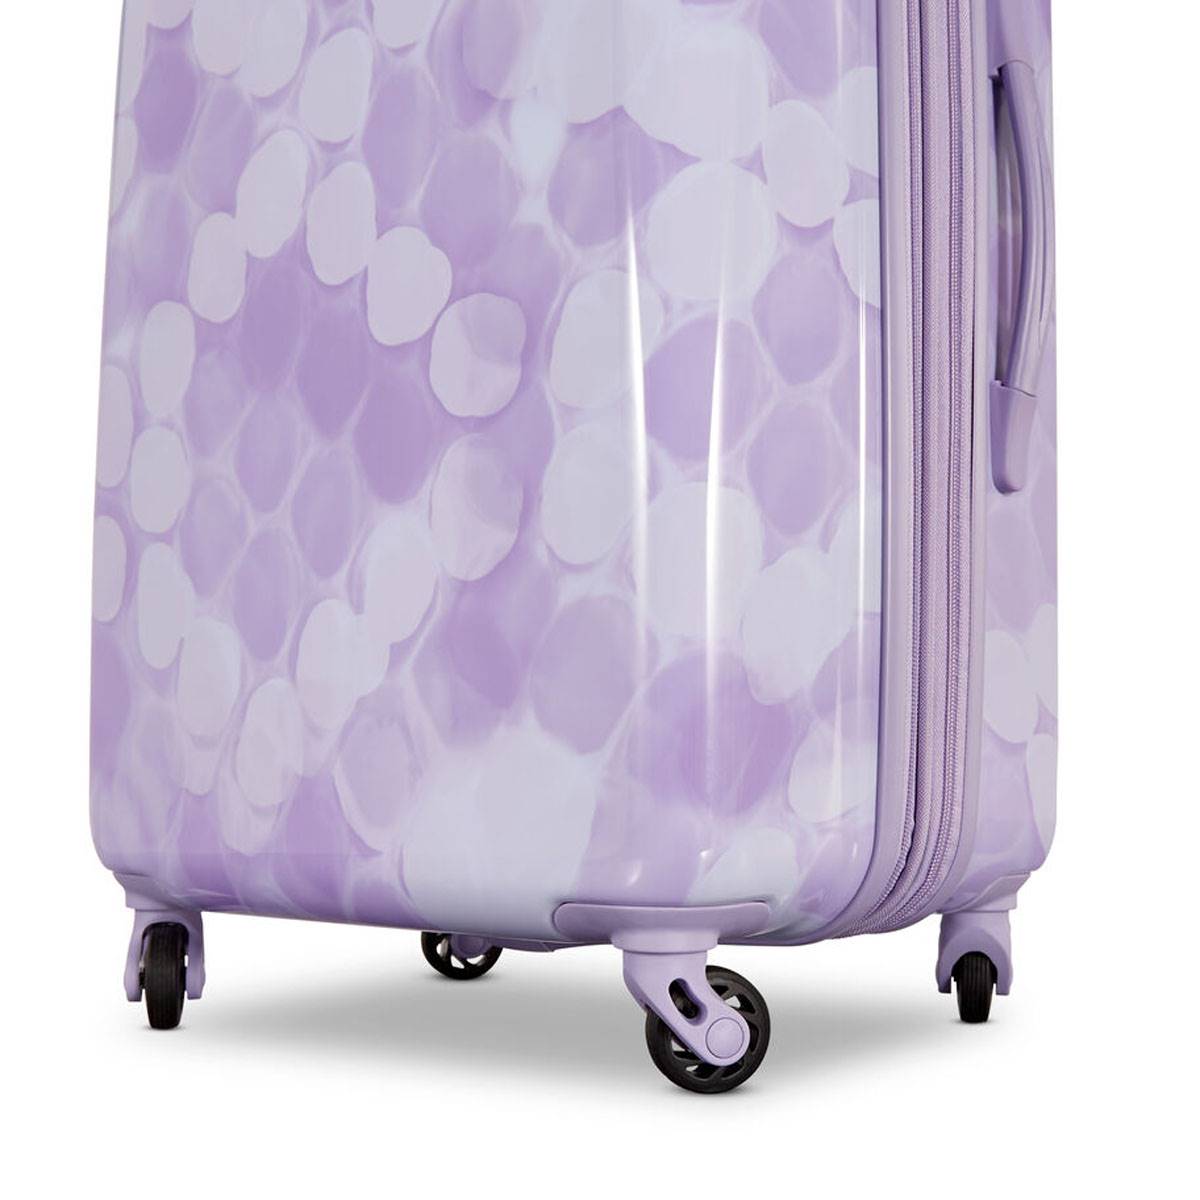 American Tourister Moonlight 21in. Carry-On Luggage